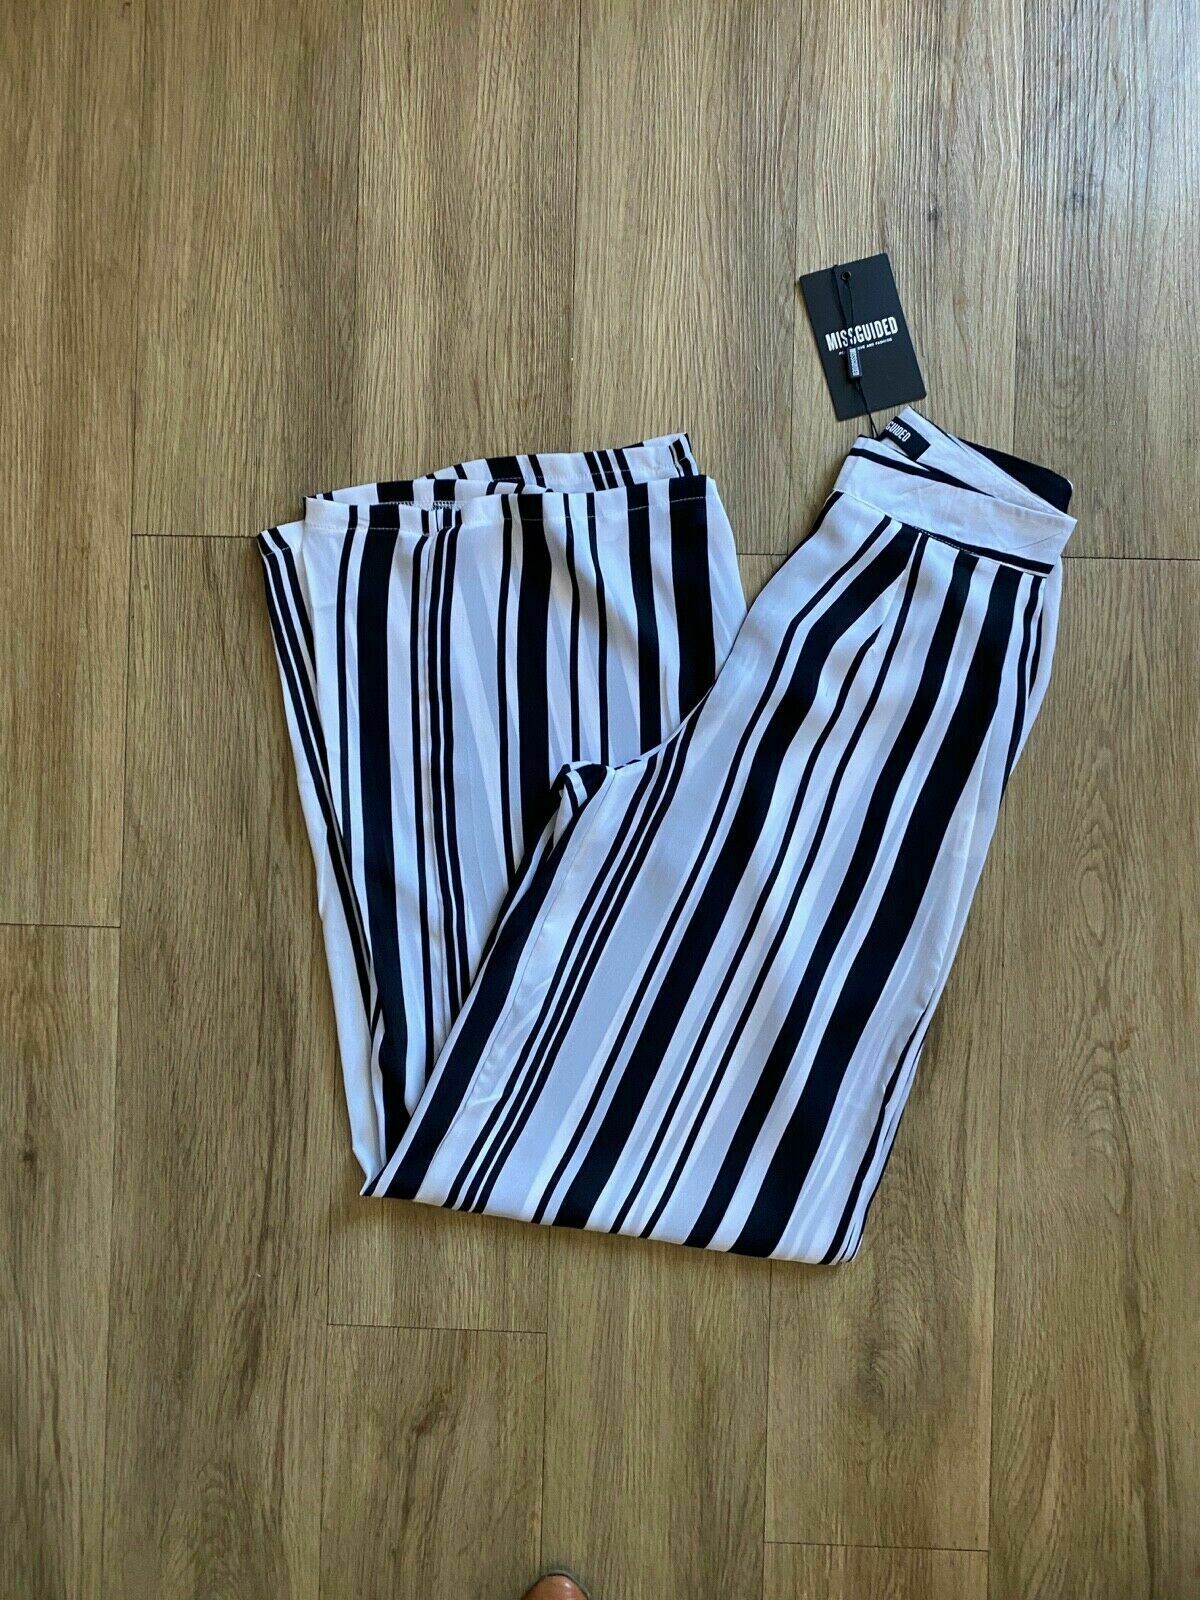 Missguided Monochrome Stripe Wide Leg Trousers Size 4 Black and White Semi-sheer